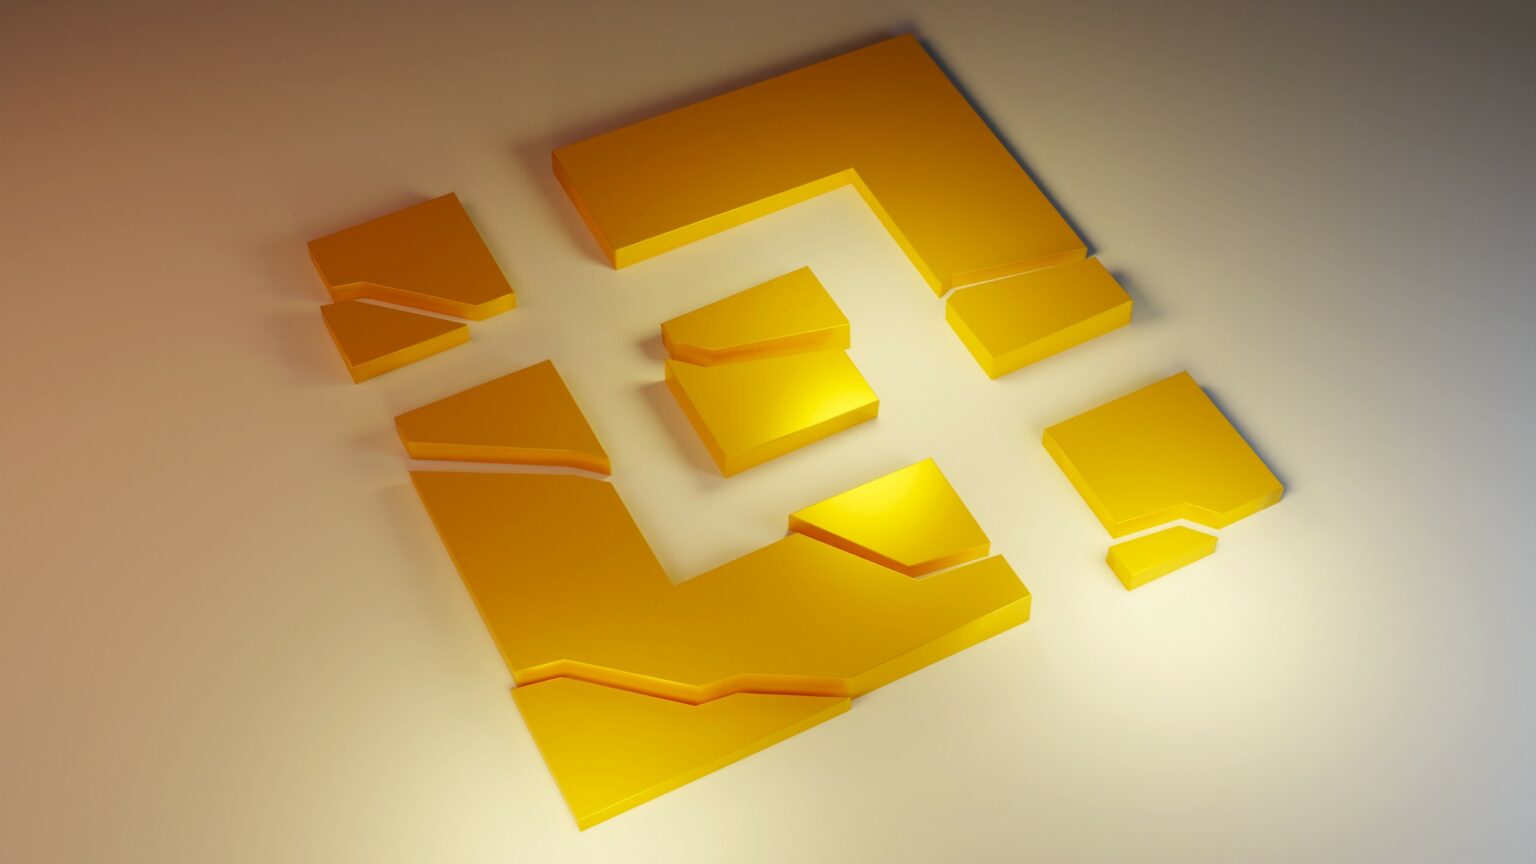 Binance Fires Back at SEC, Exposing Lack of Evidence in Court